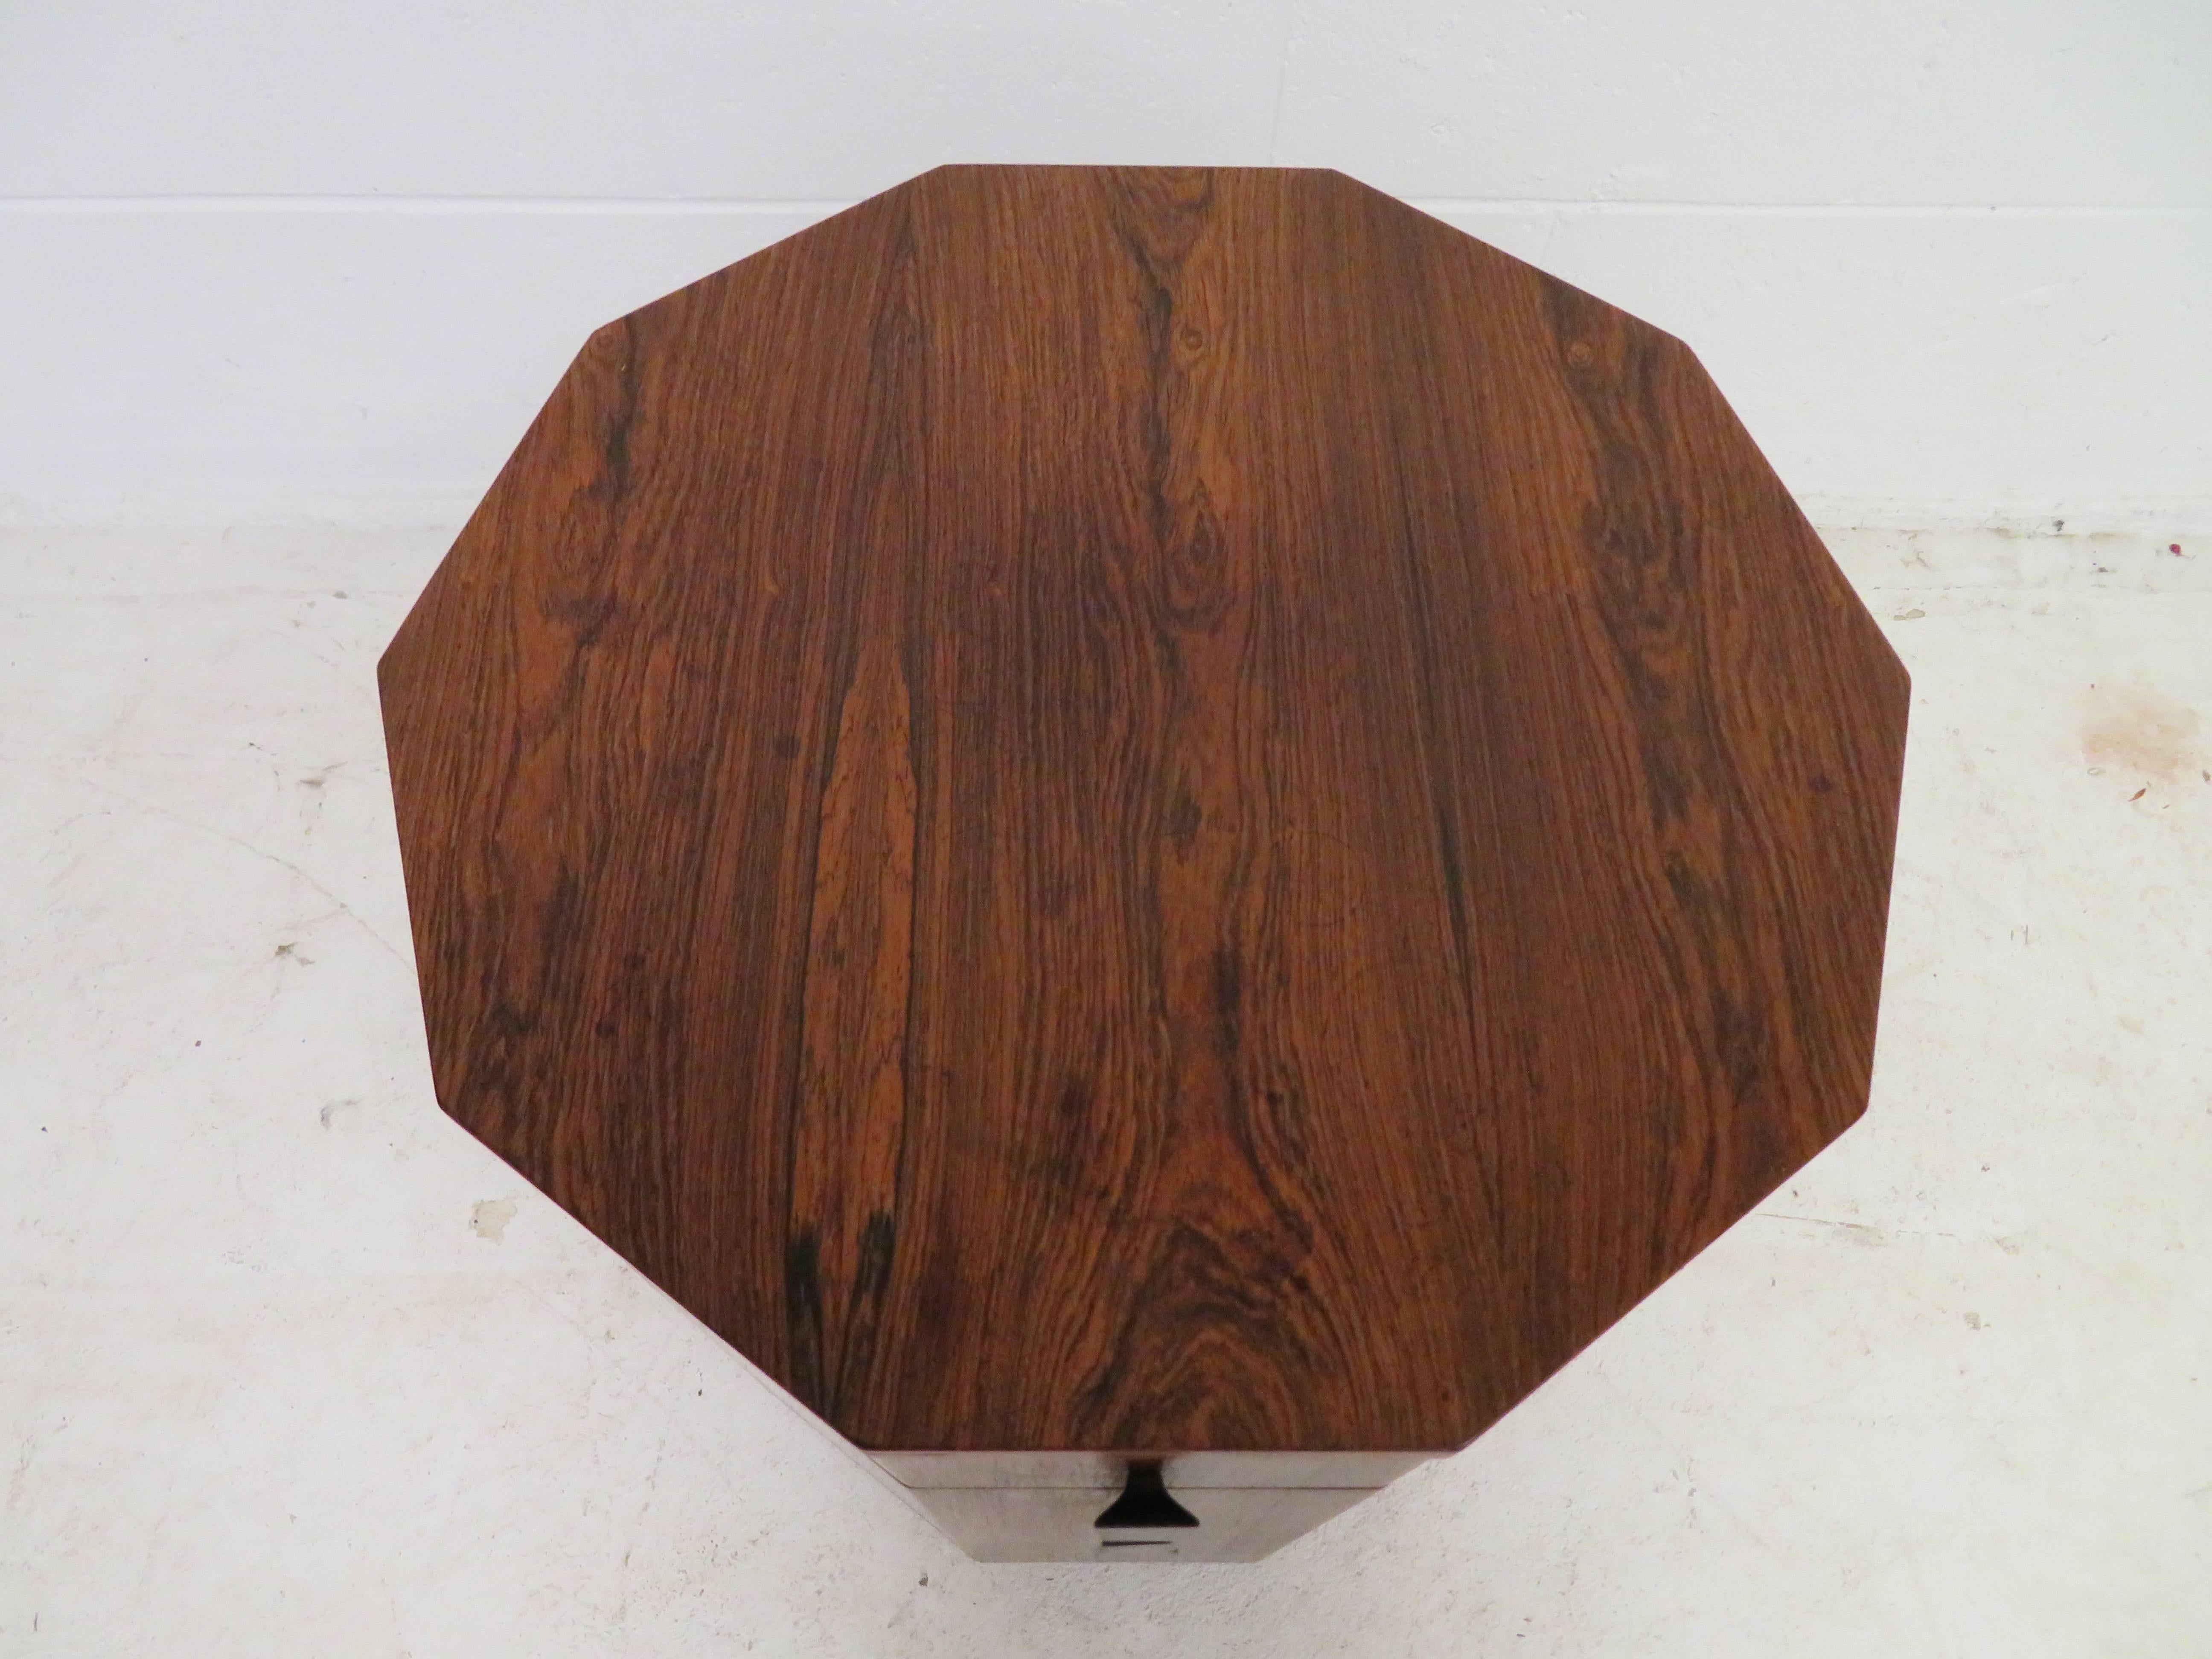 A ten-sided rosewood dry bar cabinet or lamp table with solid rosewood trapezoidal pulls. One drawer over door compartment and round wood plinth. Door incorporates two galleries for storing bottles. Designed and produced by Harvey Probber. American,